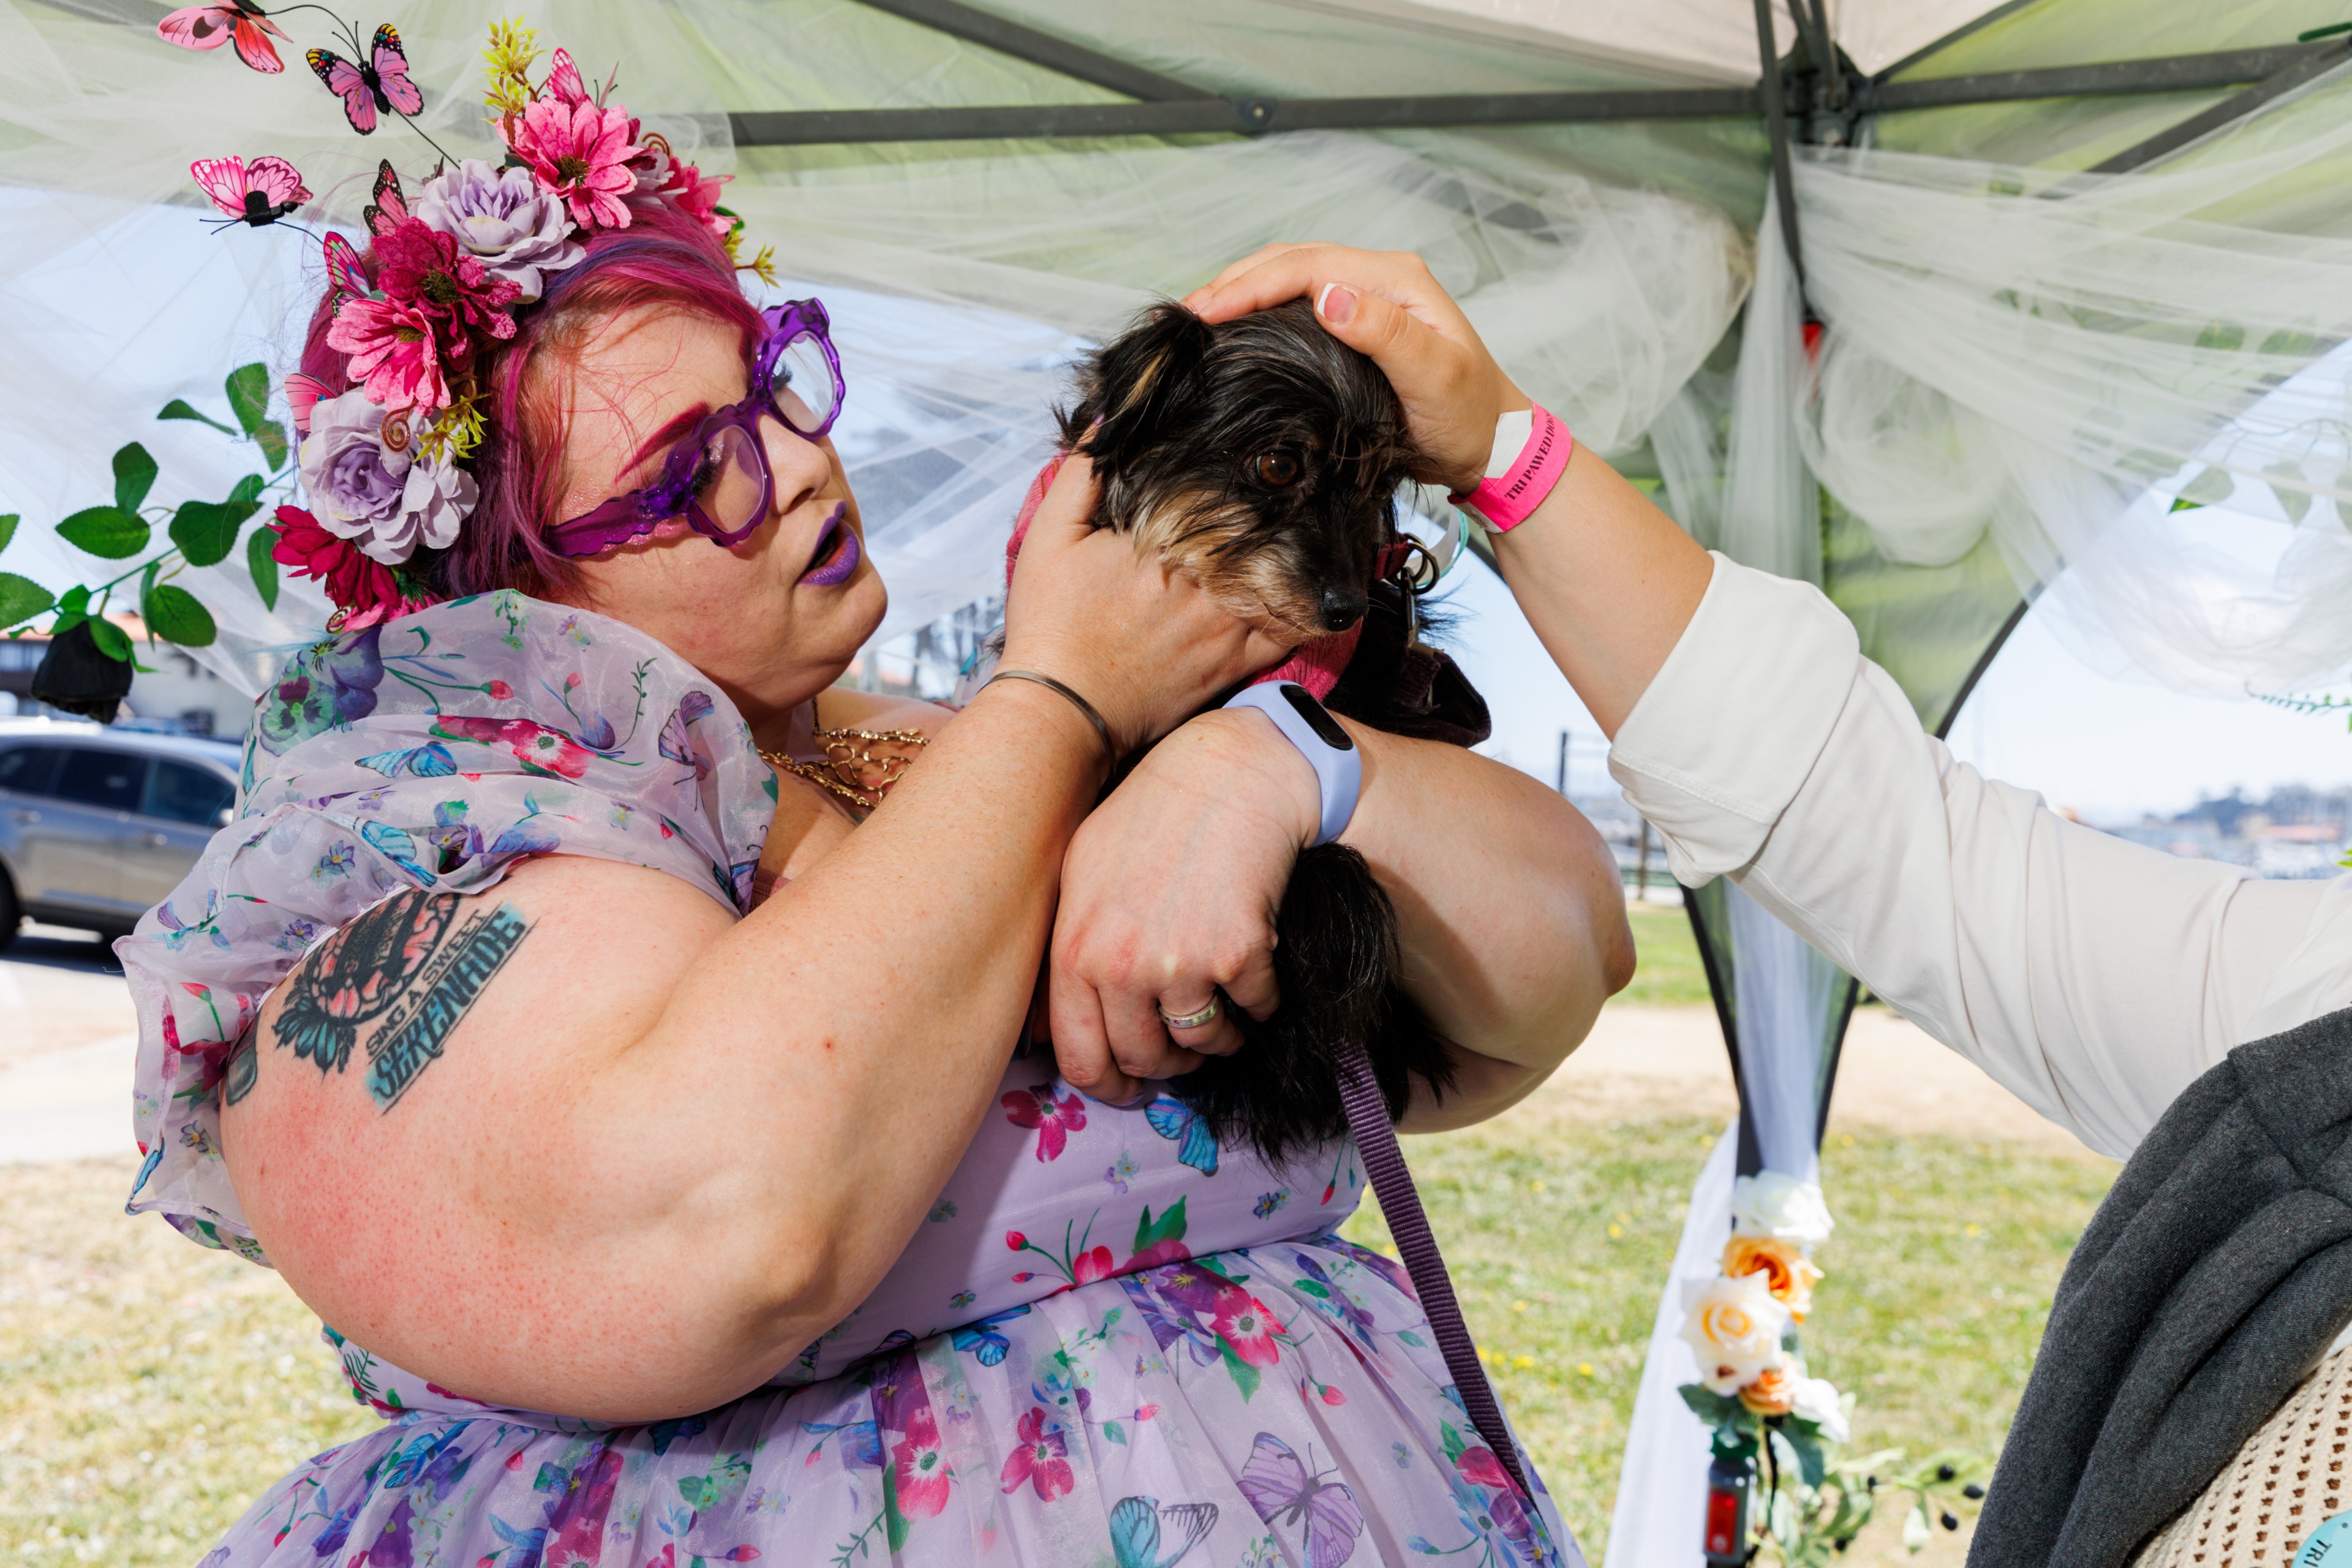 A person with pink hair, purple glasses, and a floral headdress holds a small dog while another person pets the dog under a decorated canopy outdoors.